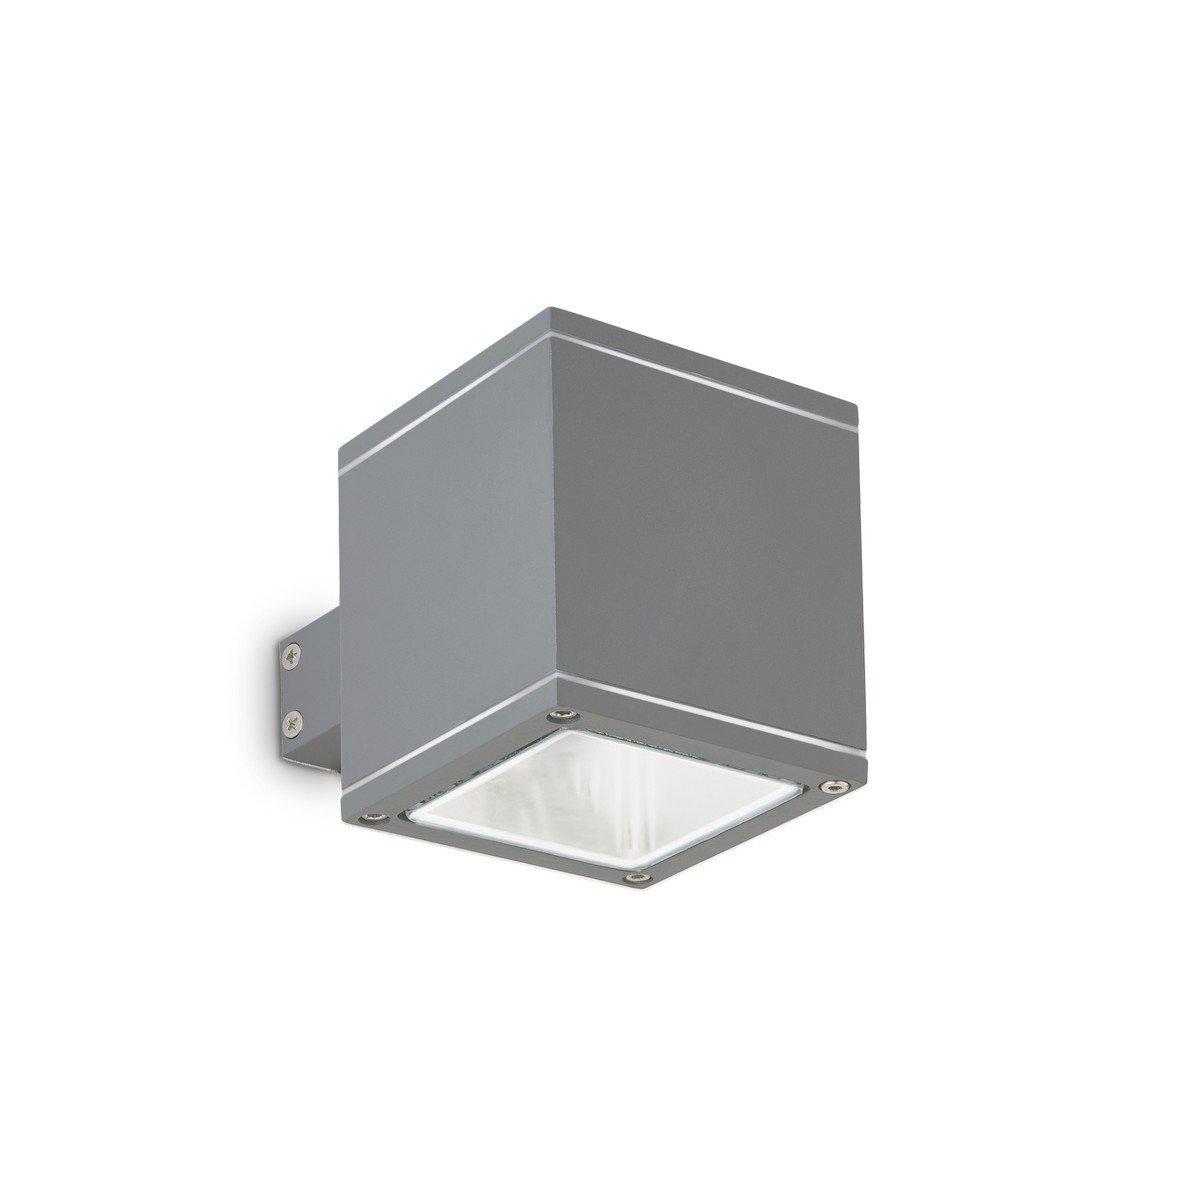 Snif Square 1 Light Outdoor Up Down Wall Light Anthracite Putty IP44 G9